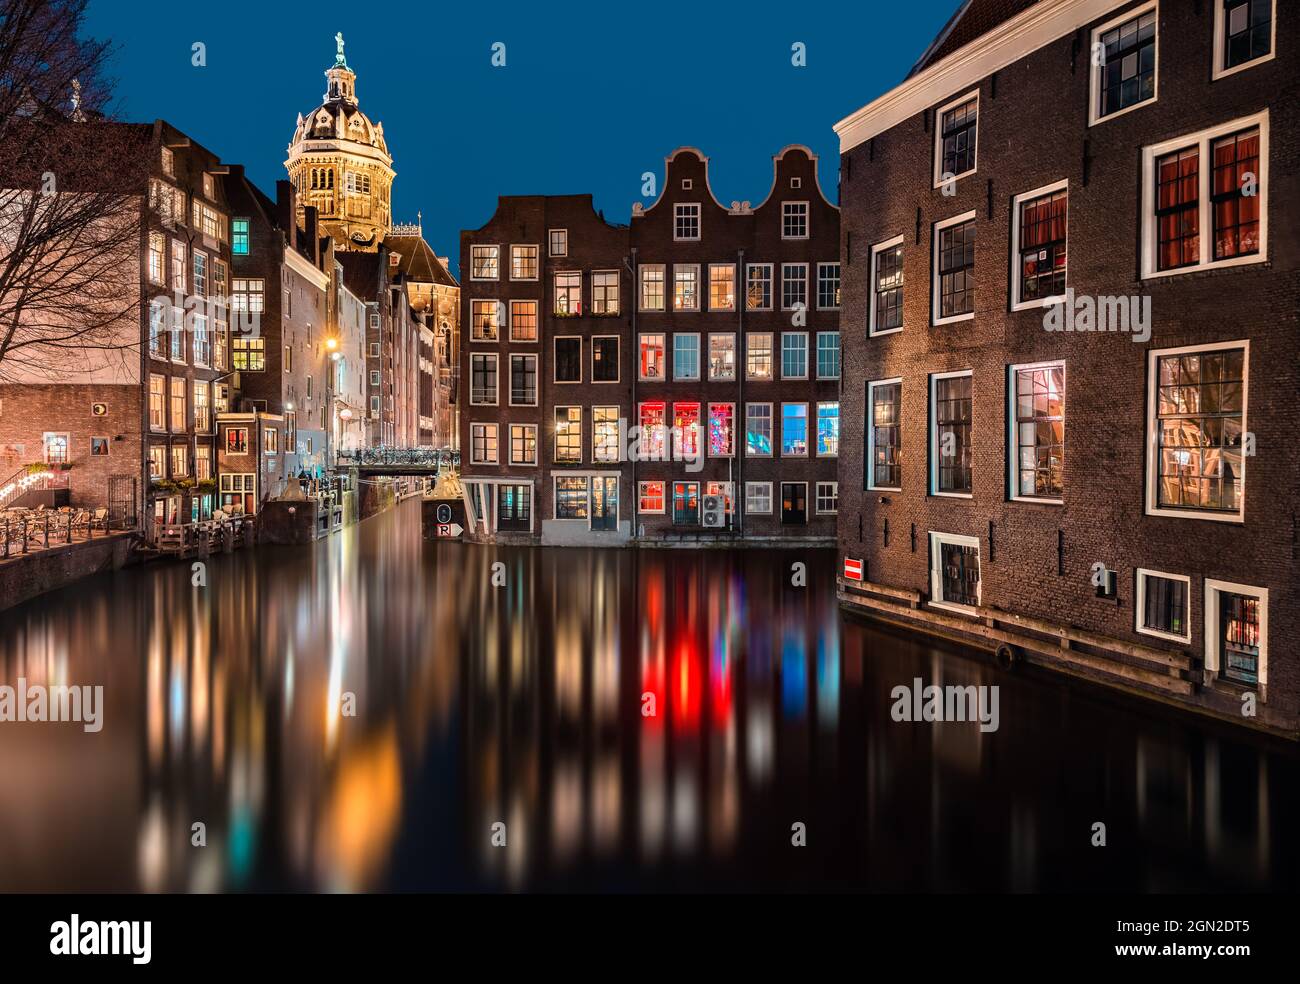 NETHERLANDS, AMSTERDAM, AMSTERDAM NIGHTLIFE WITH TYPICAL CANAL HOUSES AND CHURCH DURING BLUE HOUR Stock Photo